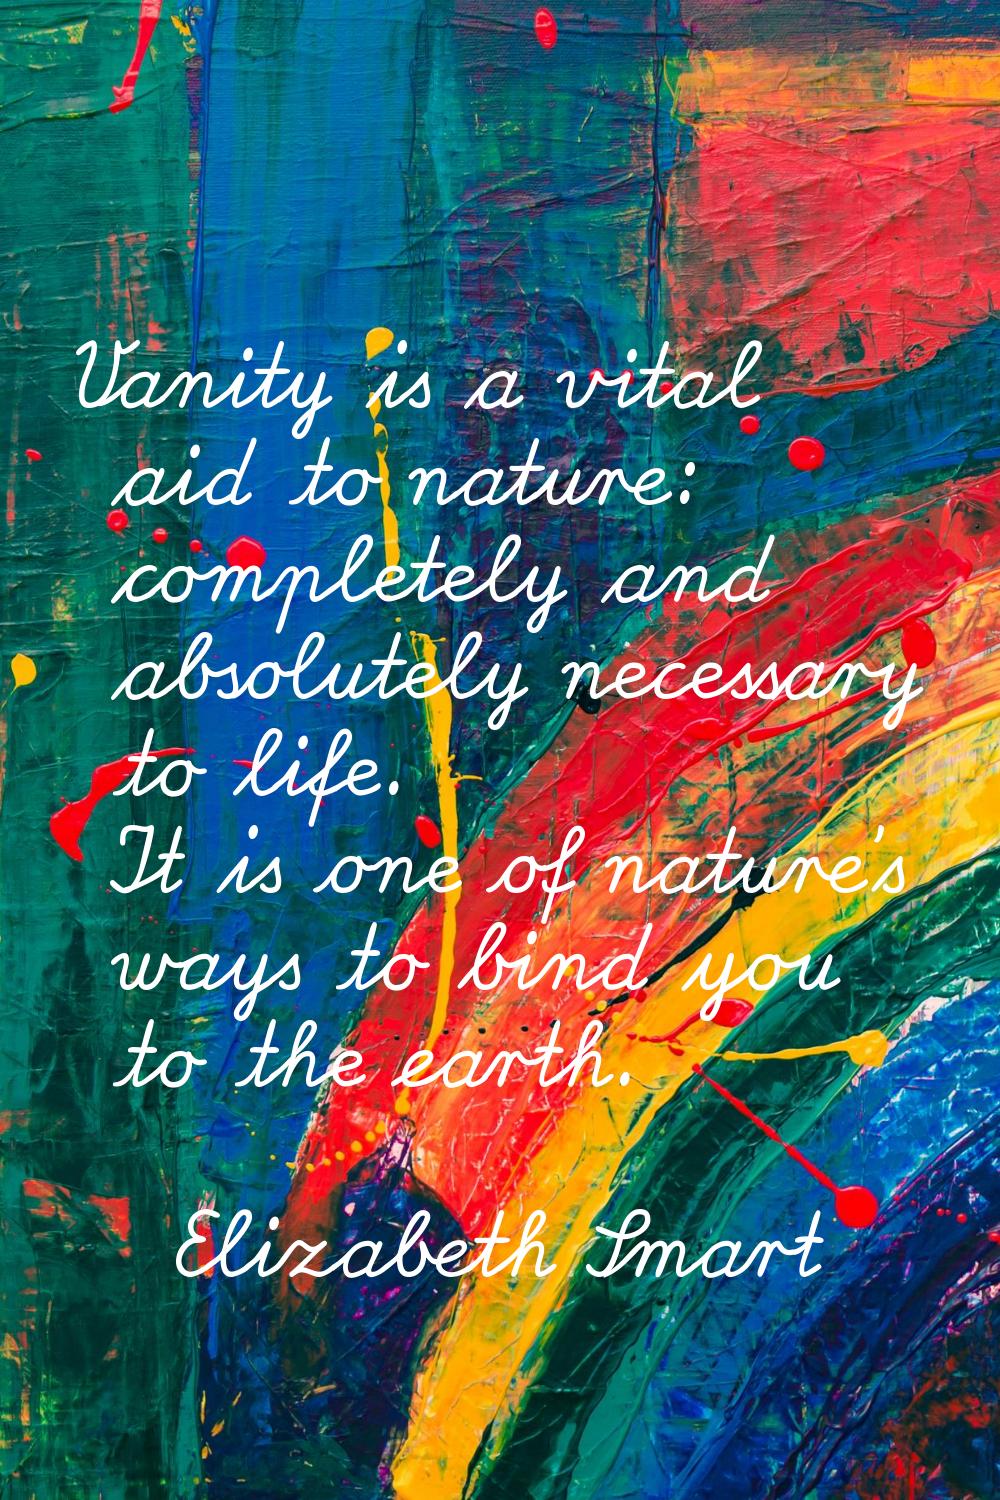 Vanity is a vital aid to nature: completely and absolutely necessary to life. It is one of nature's